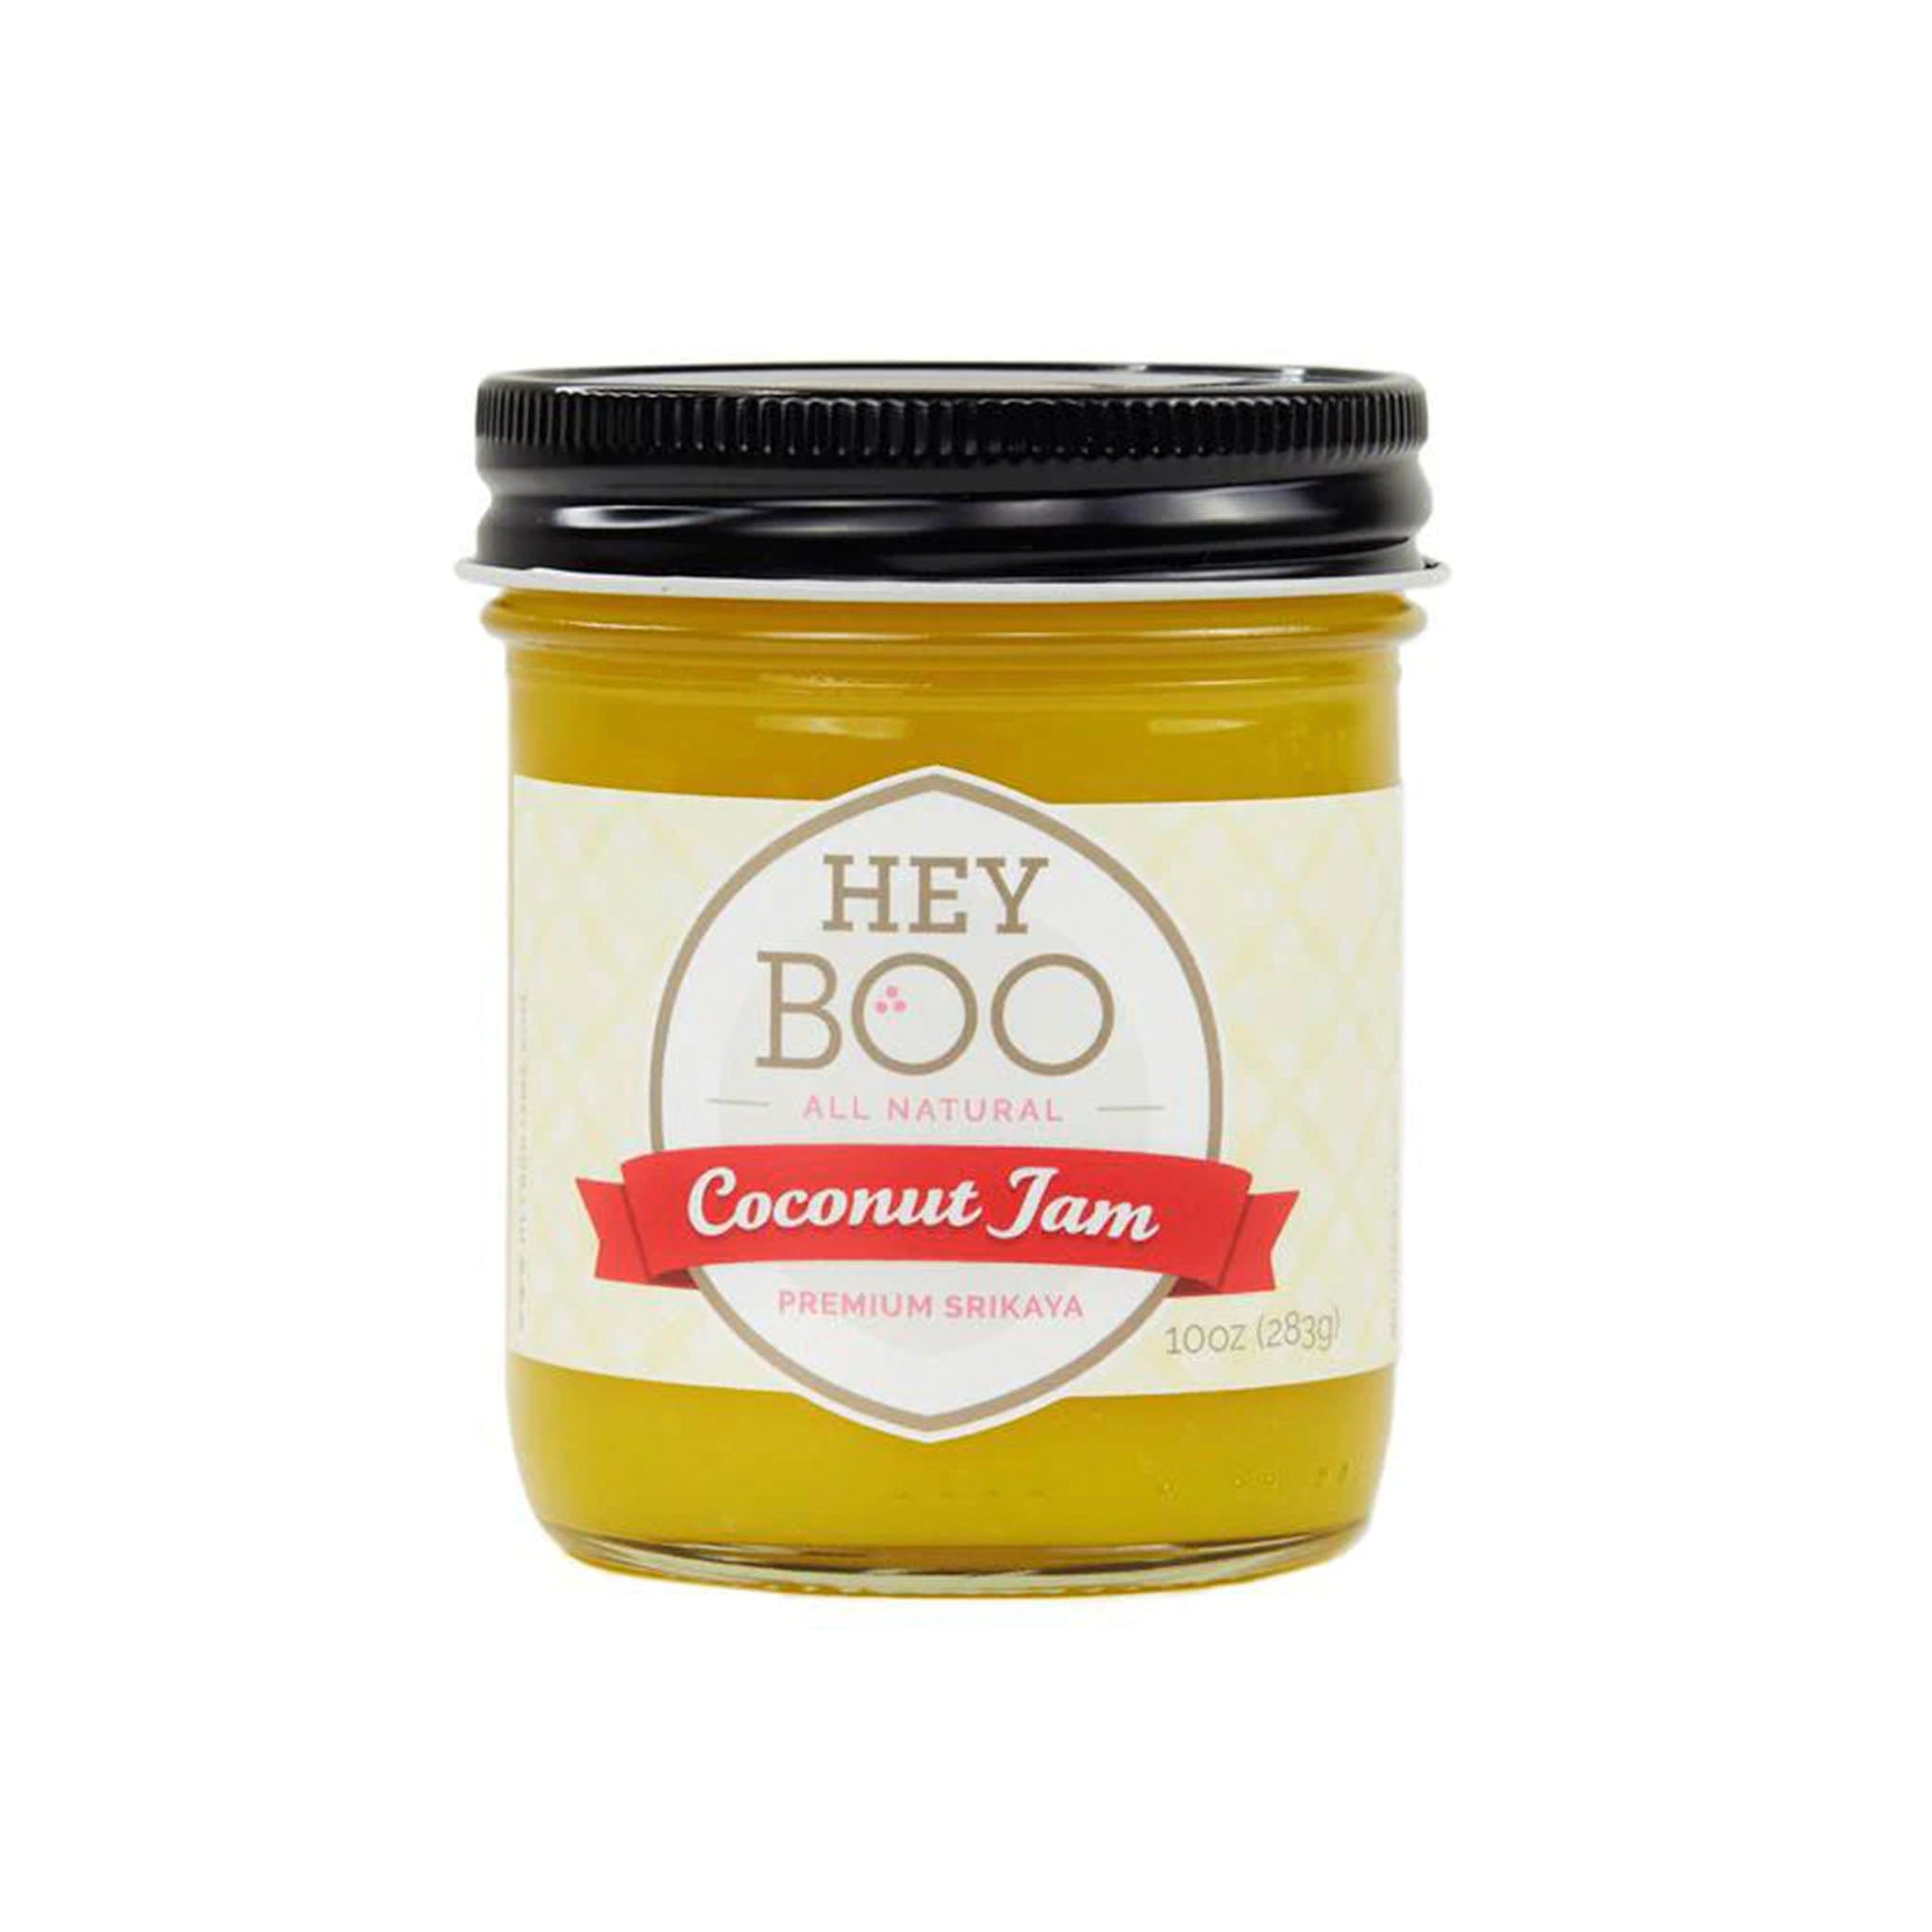 Hey Boo All Natural Coconut Jam